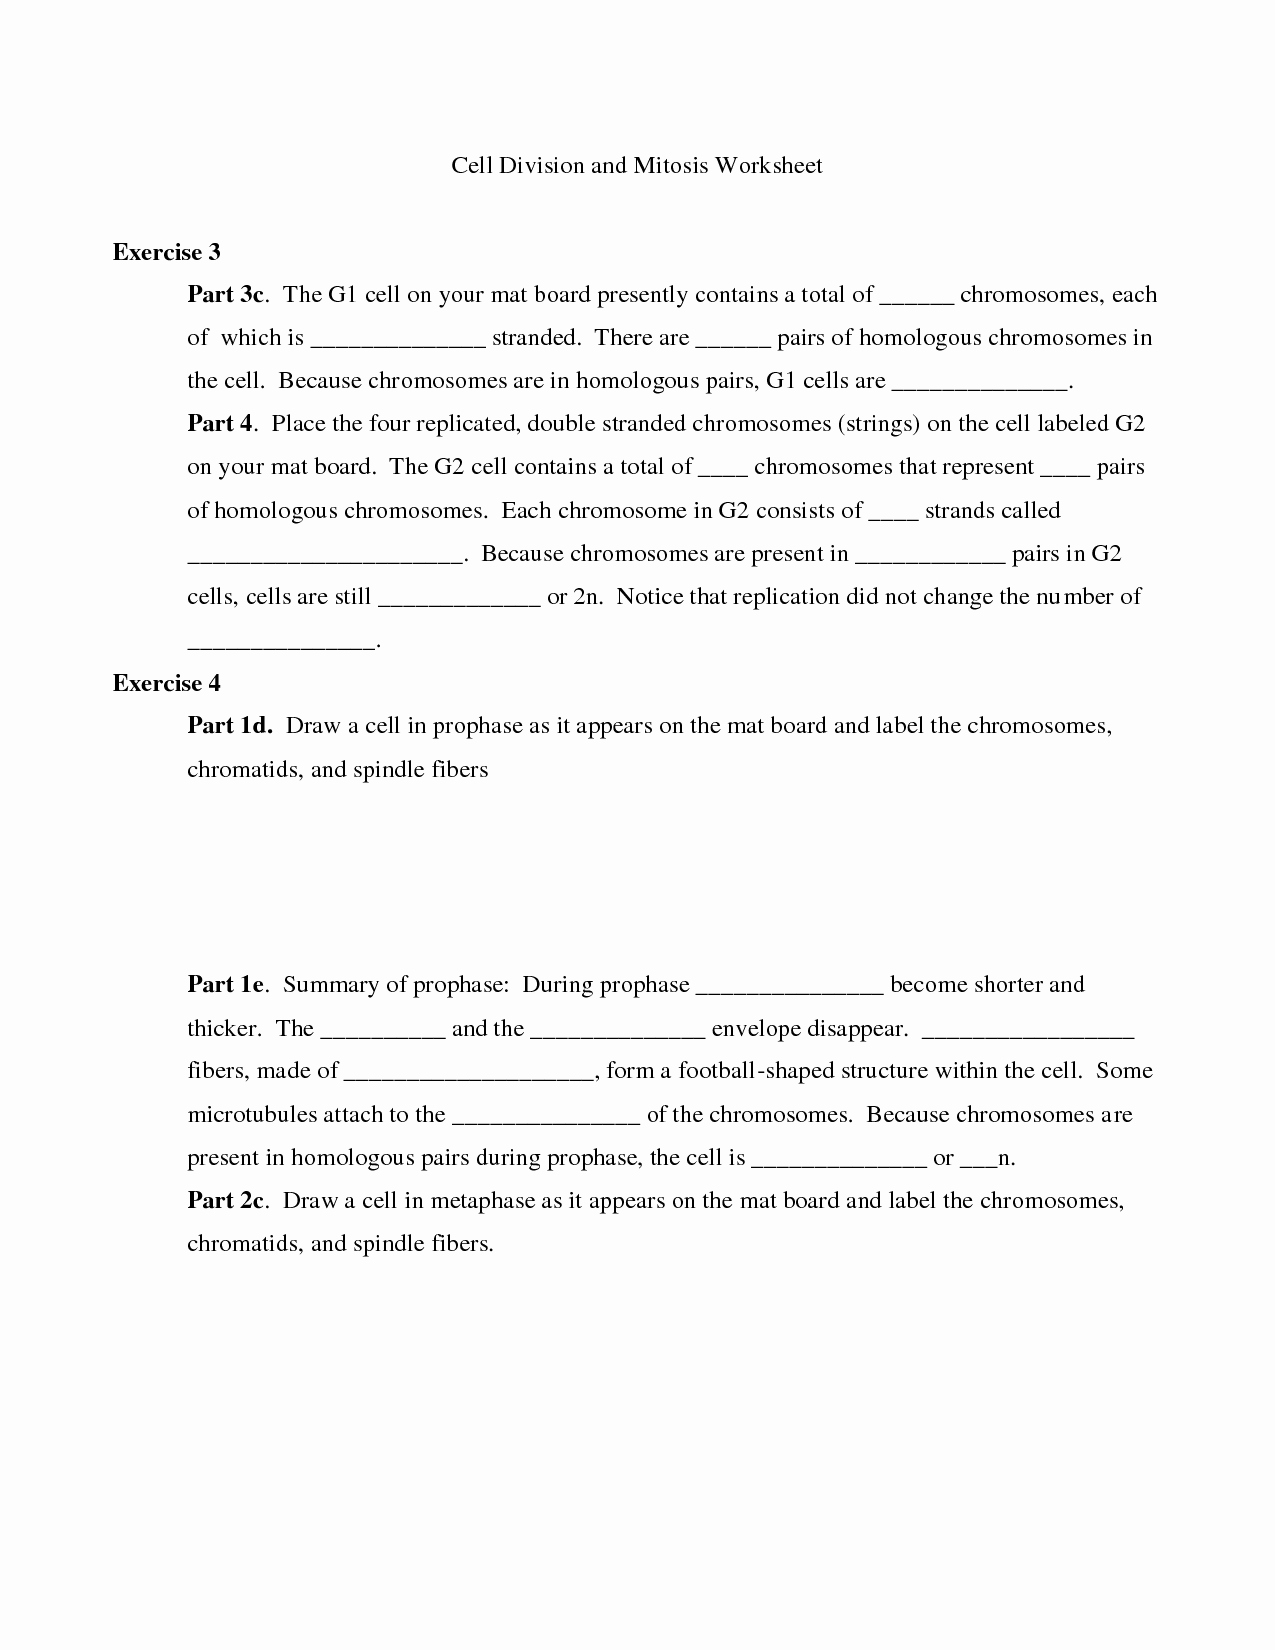 Cell Cycle Worksheet Answers Awesome 18 Best Of Cell Cycle Review Worksheet Answers